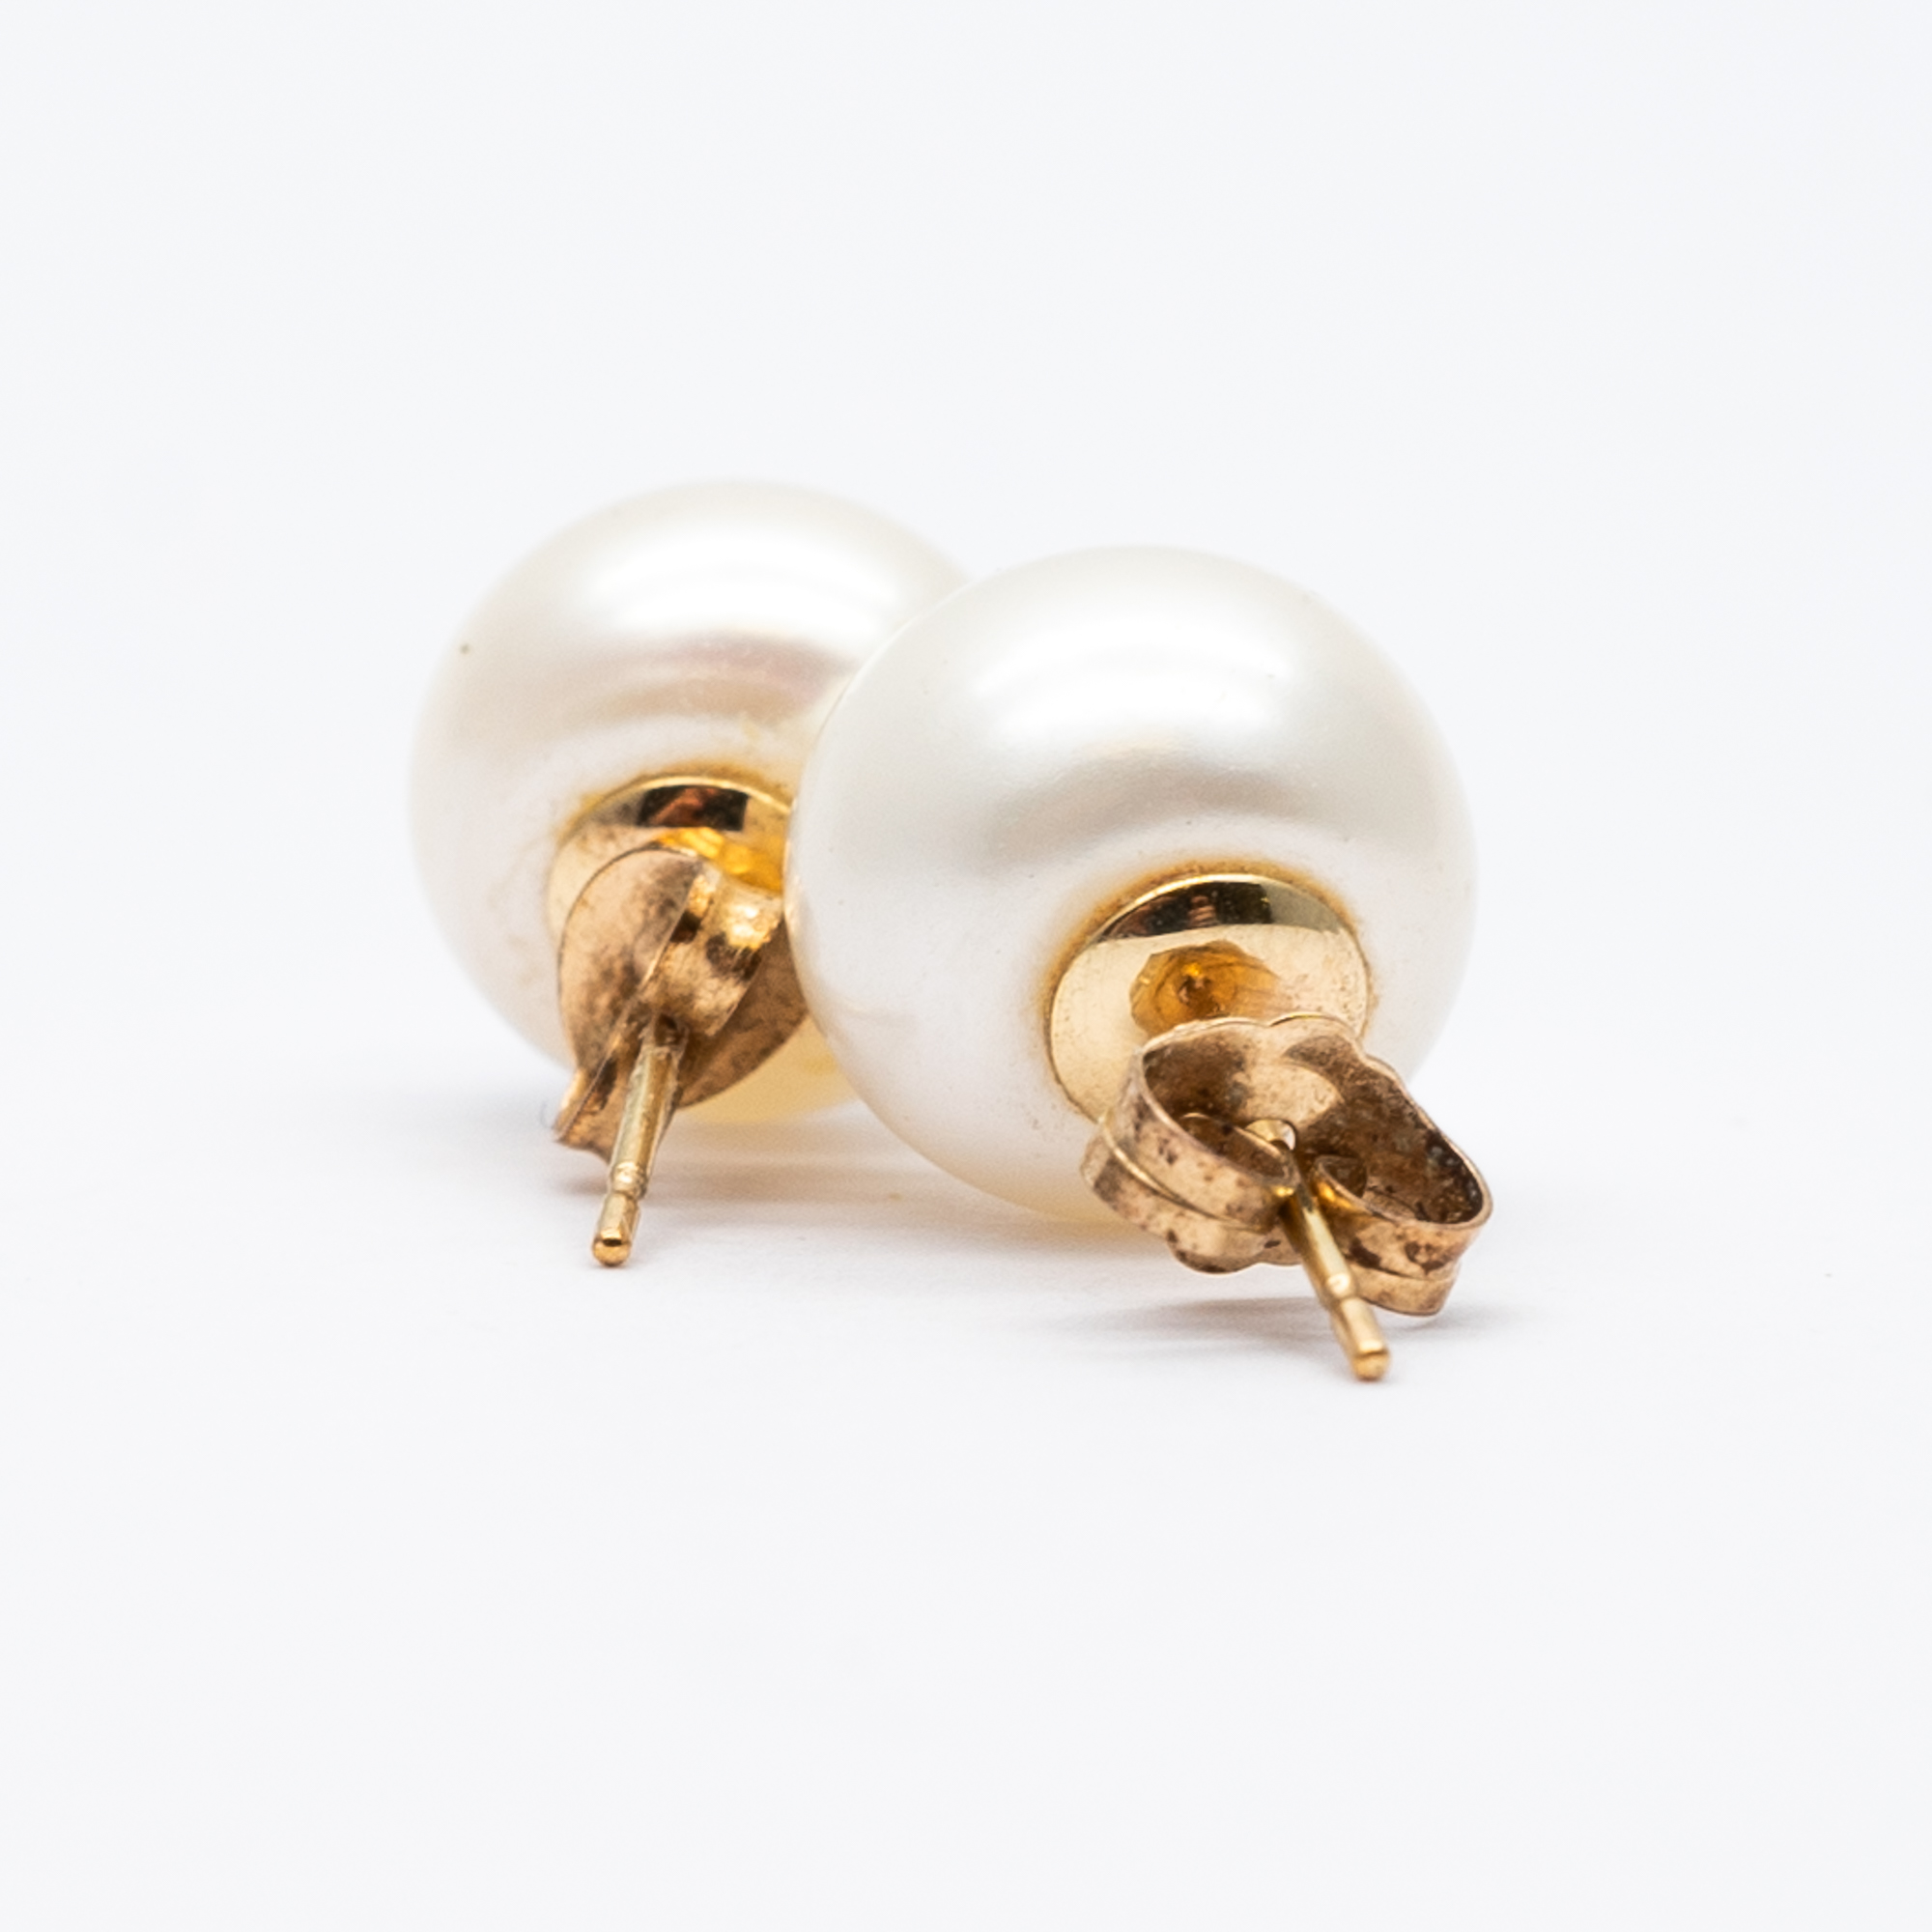 A pair of 9ct yellow gold cultured pearl earrings - Image 2 of 4